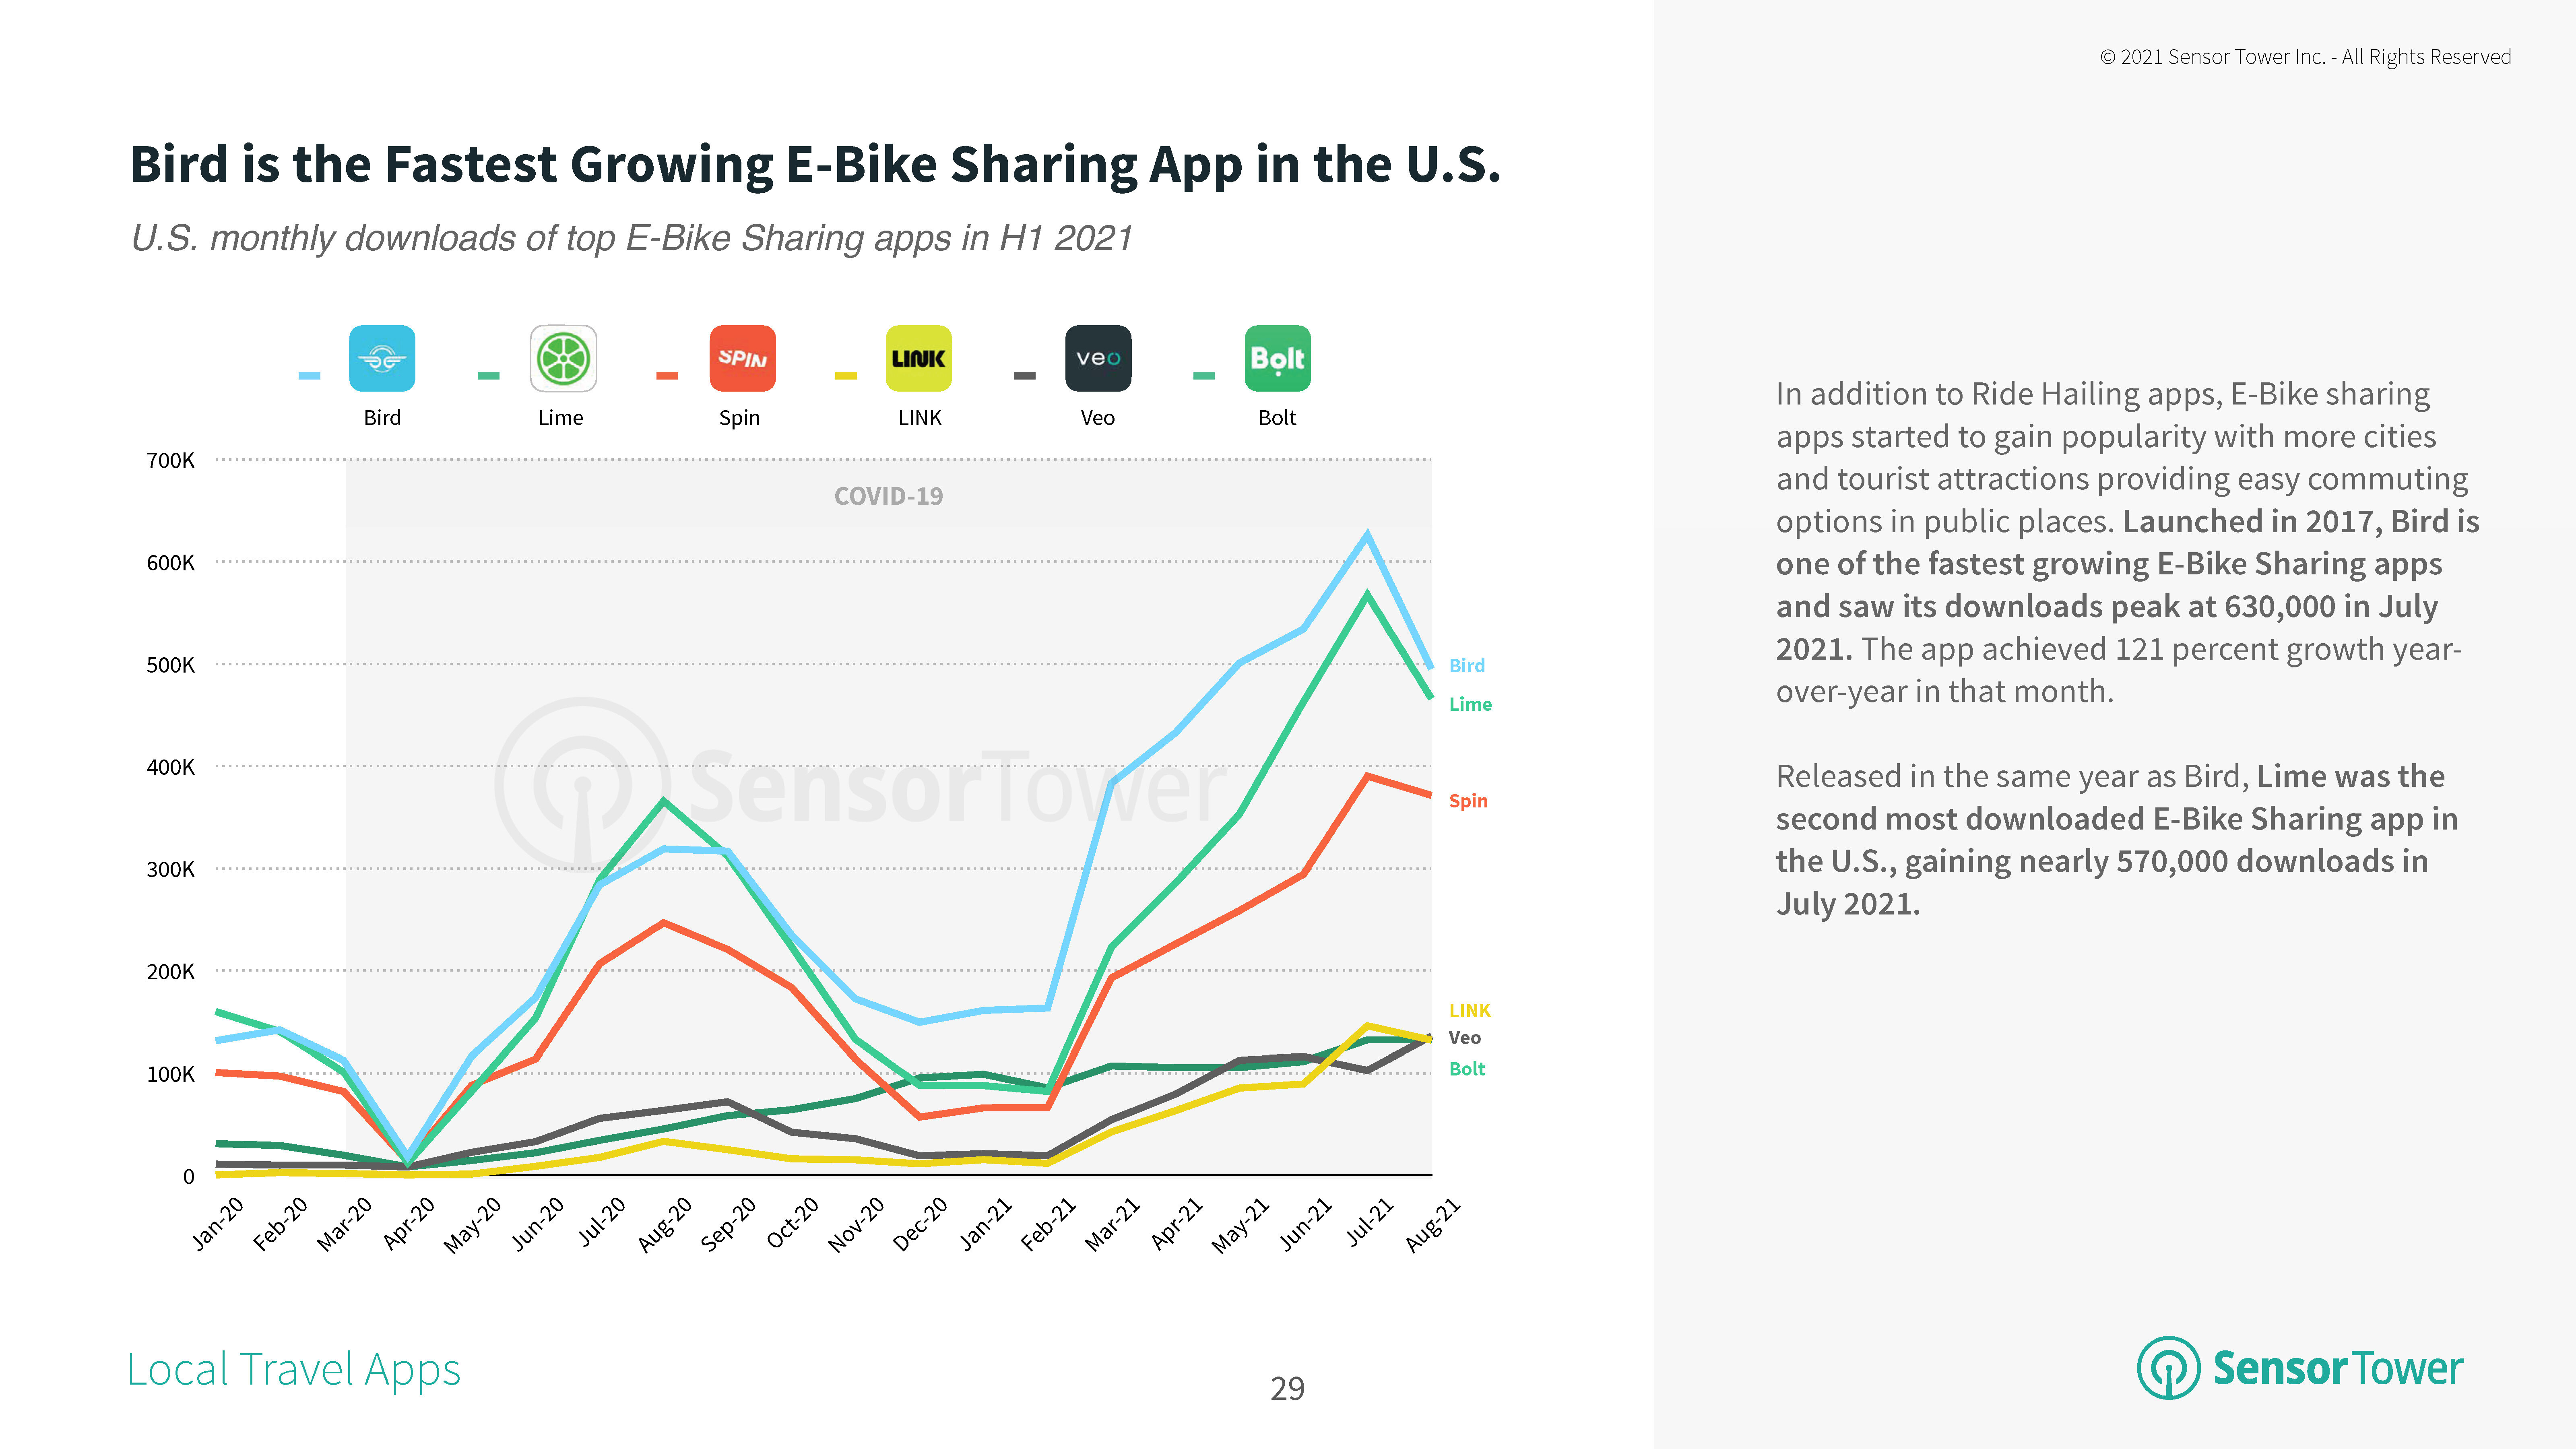 Bird is the Fastest Growing E-Bike Sharing App in the U.S.